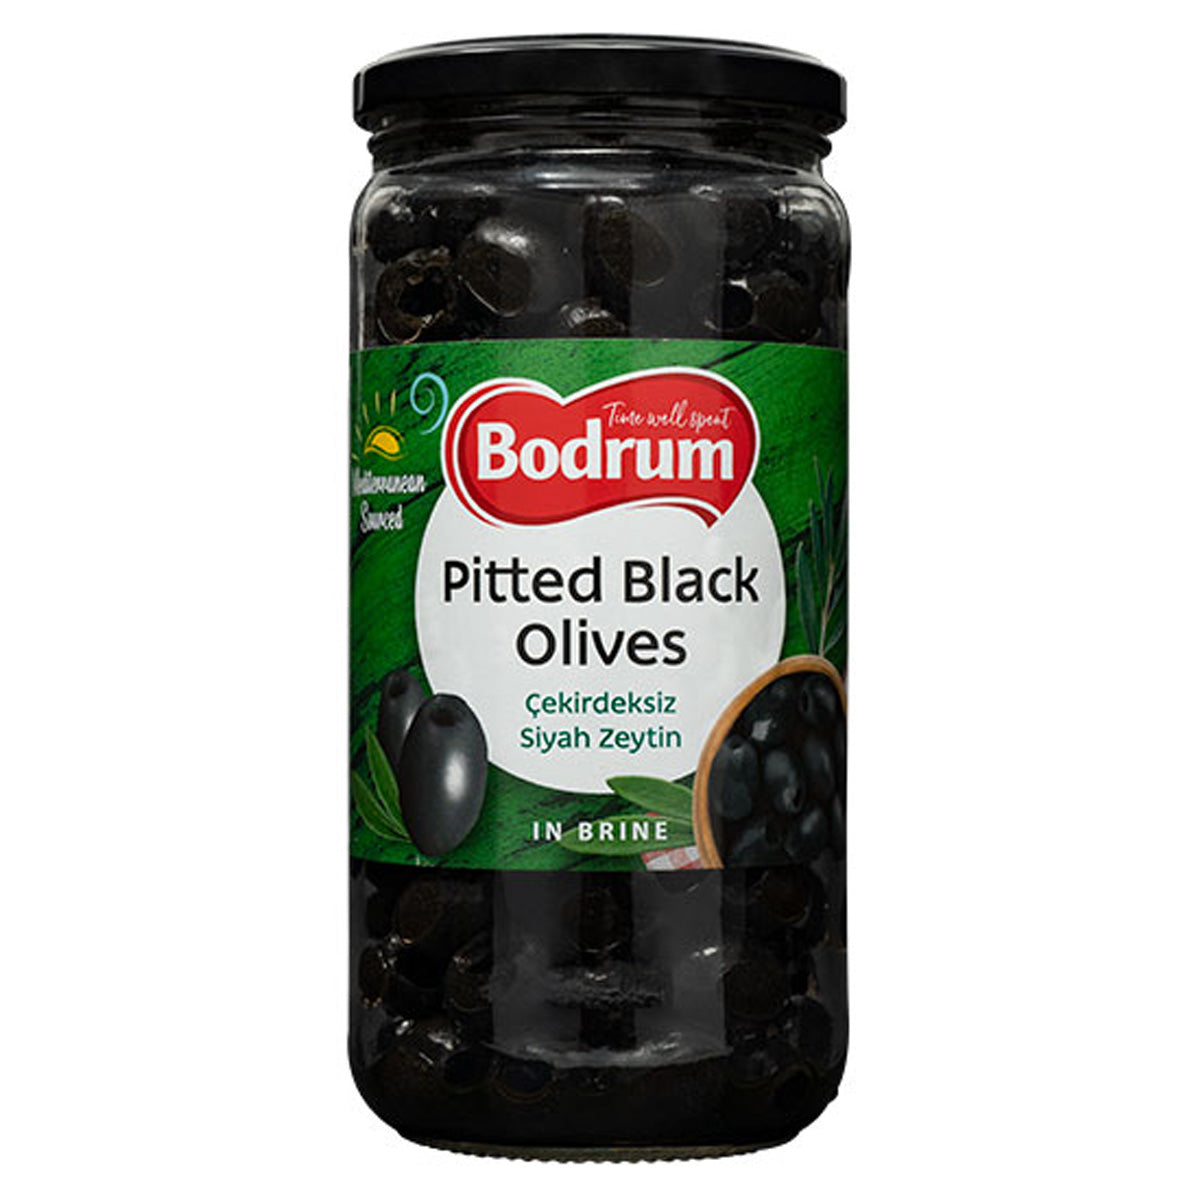 A jar of Bodrum - Pitted Black Olives - 720g on a white background.